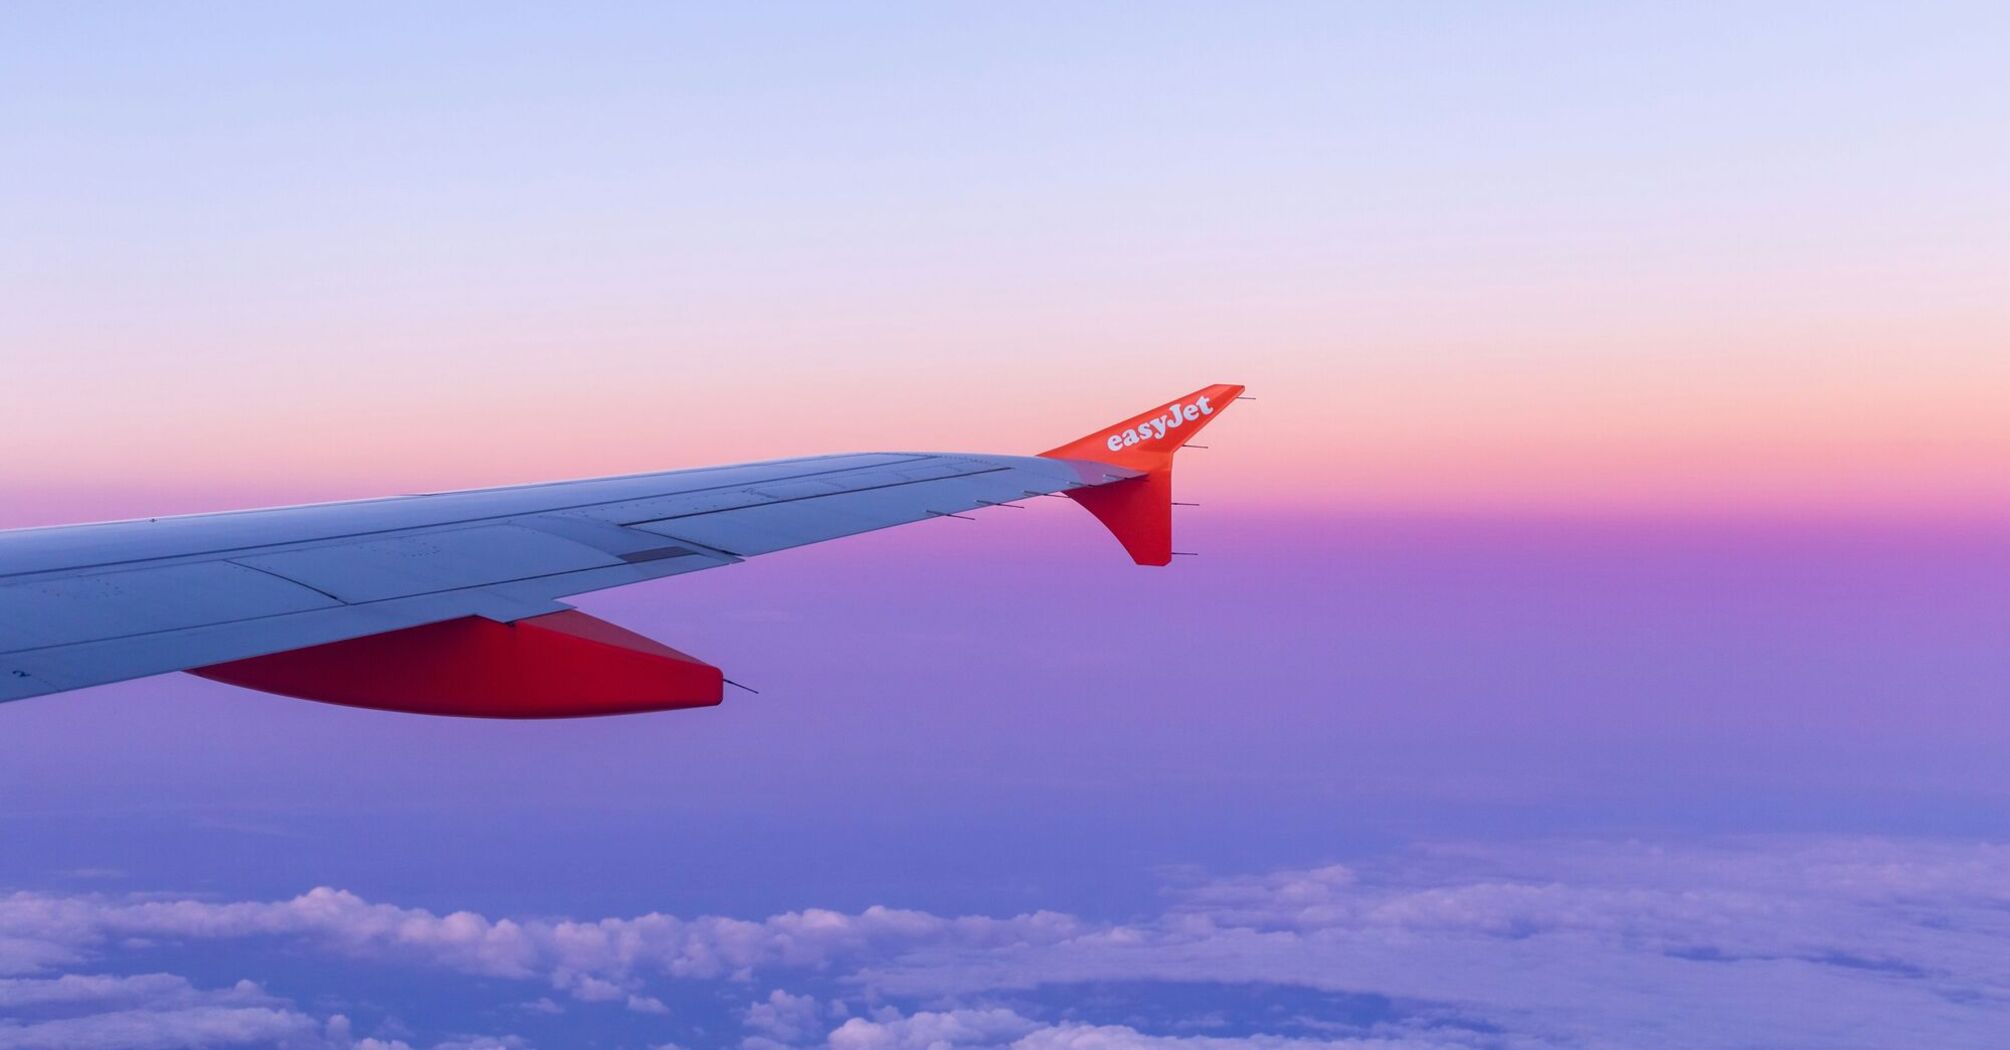 Wing of an easyJet airplane against a purple and pink sky at sunset, flying above the clouds